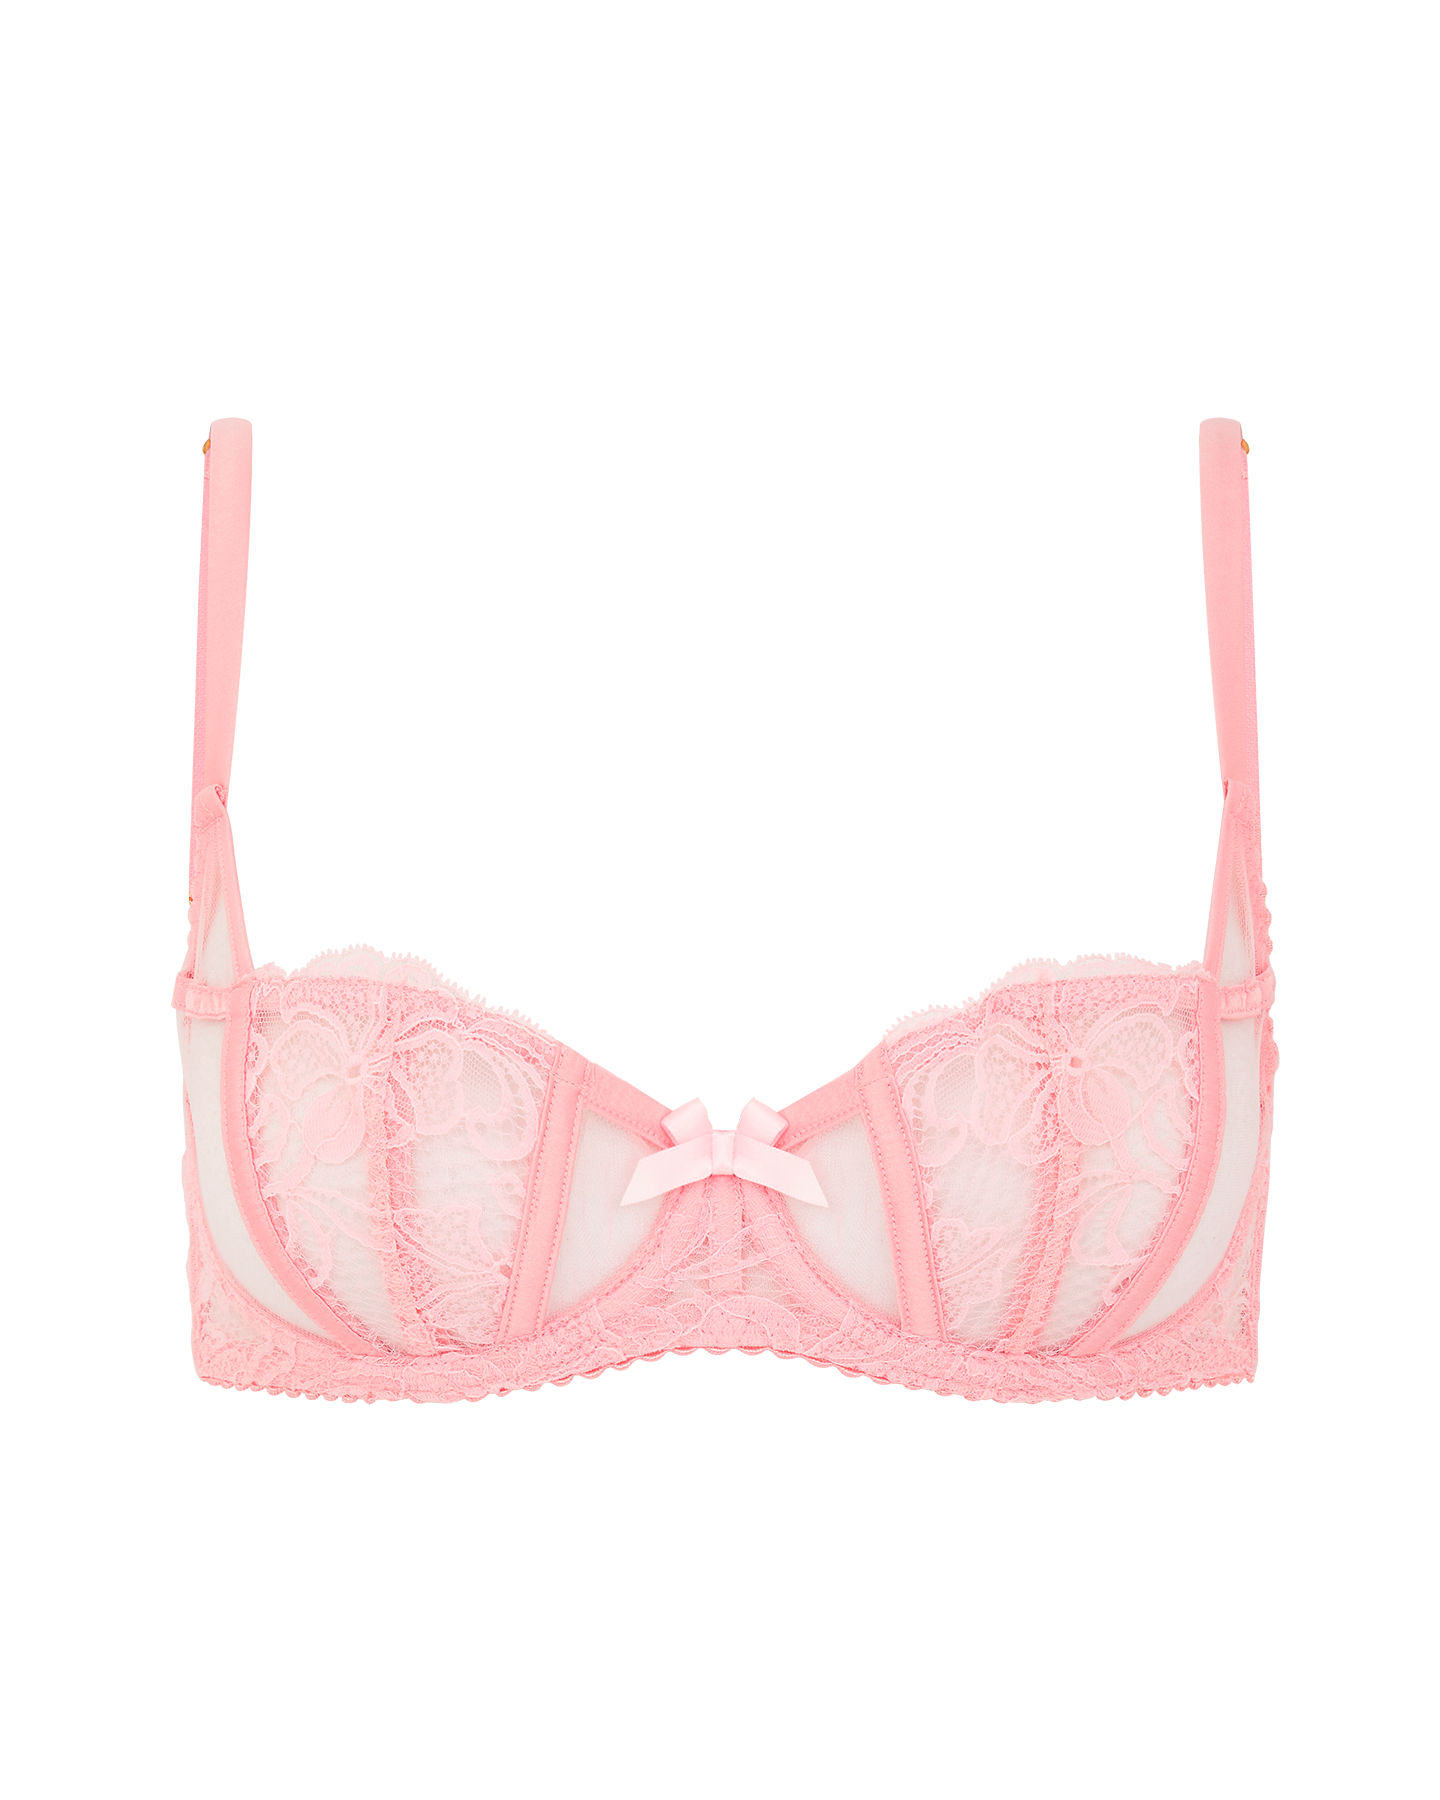 Agent Provocateur Strapless Bra Size 34C New With Tag Pink - Helia